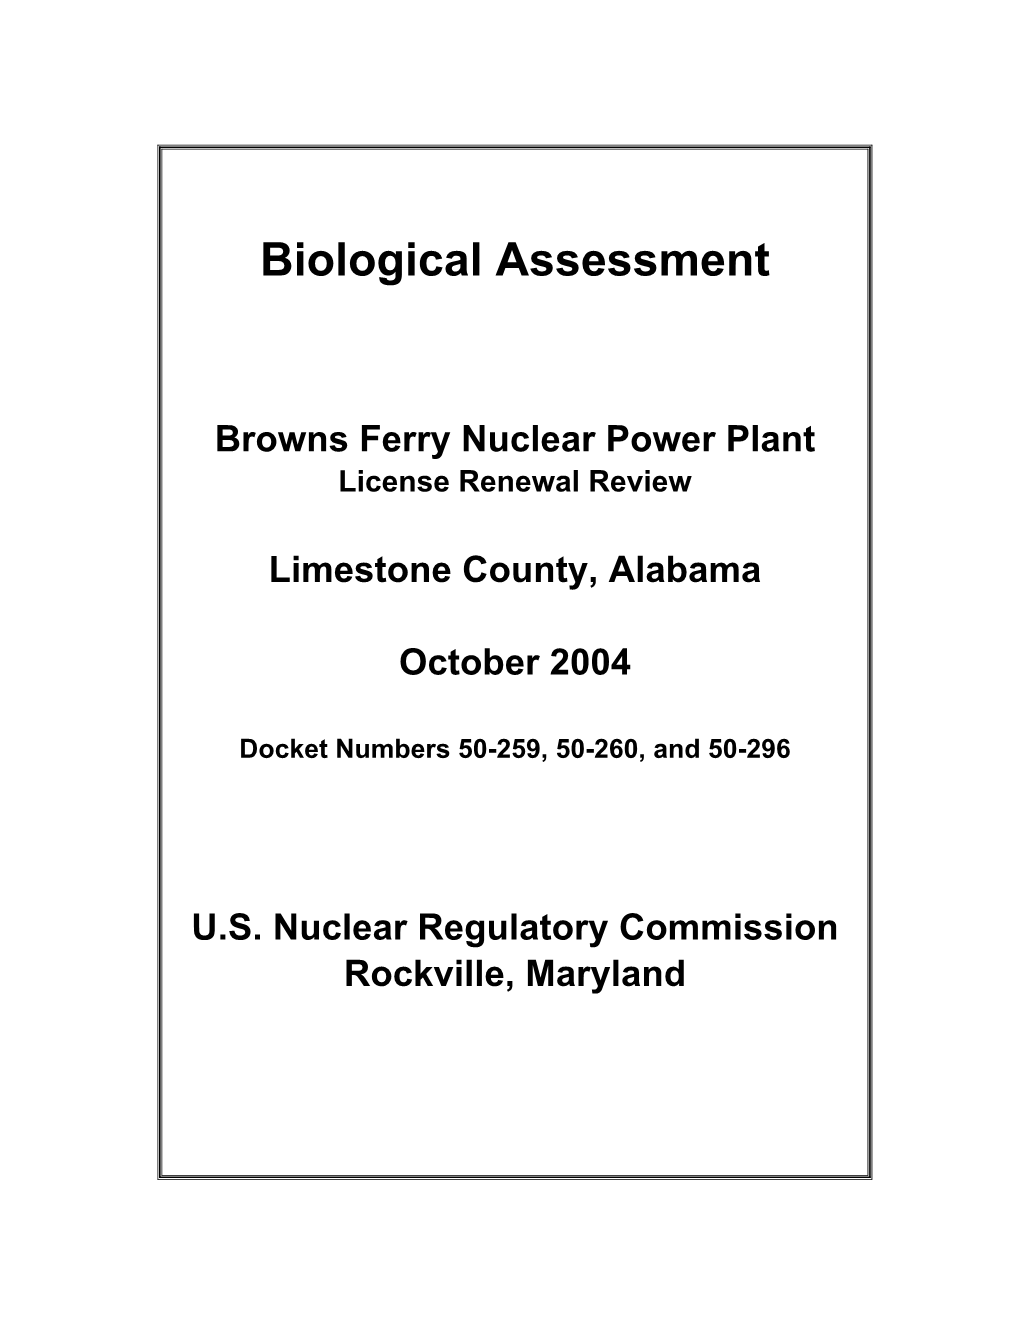 Environmental Report (ER) (TVA 2003) in Conjunction with Its Application for Renewal of the BFN Ols, As Provided for by the Following NRC Regulations